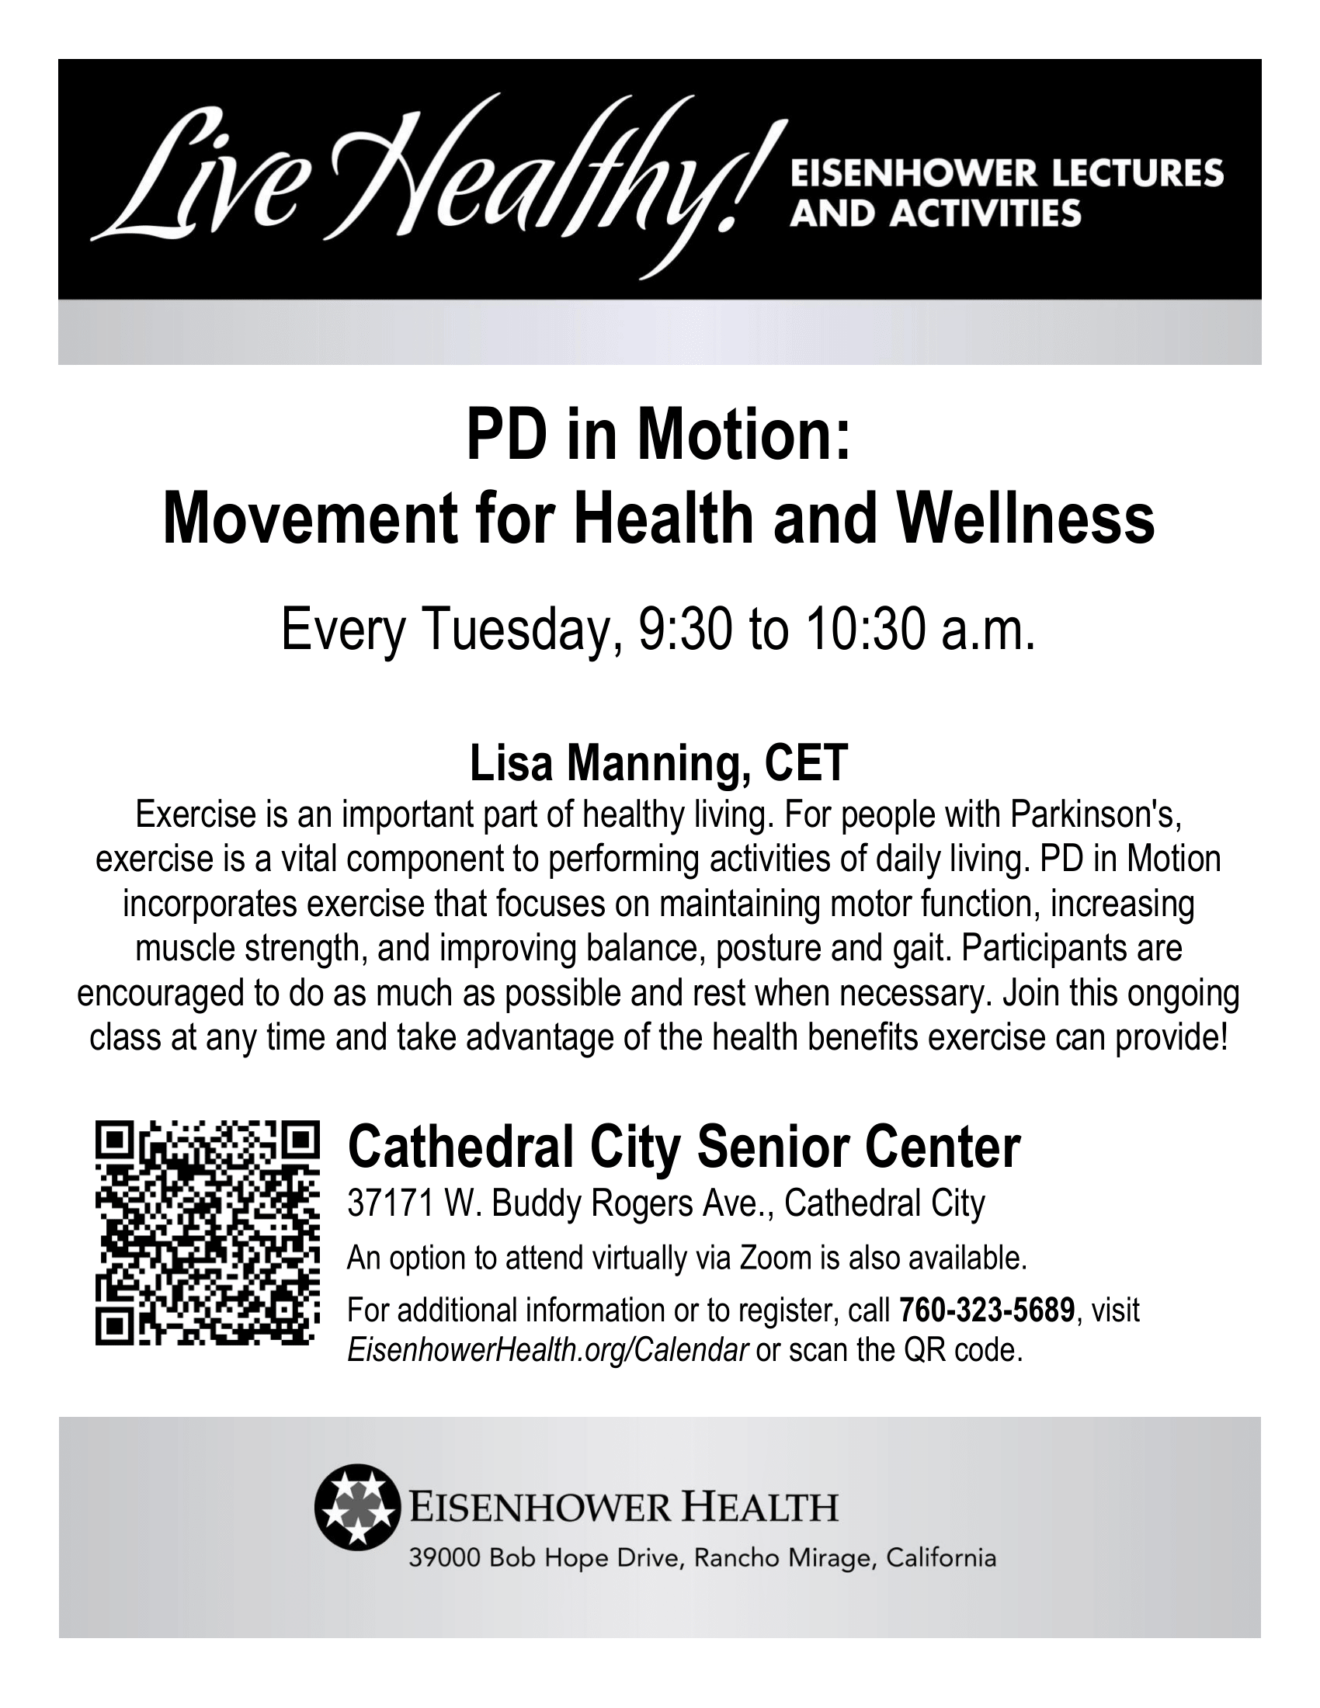 PD in Motion: Movement for Health and Wellness